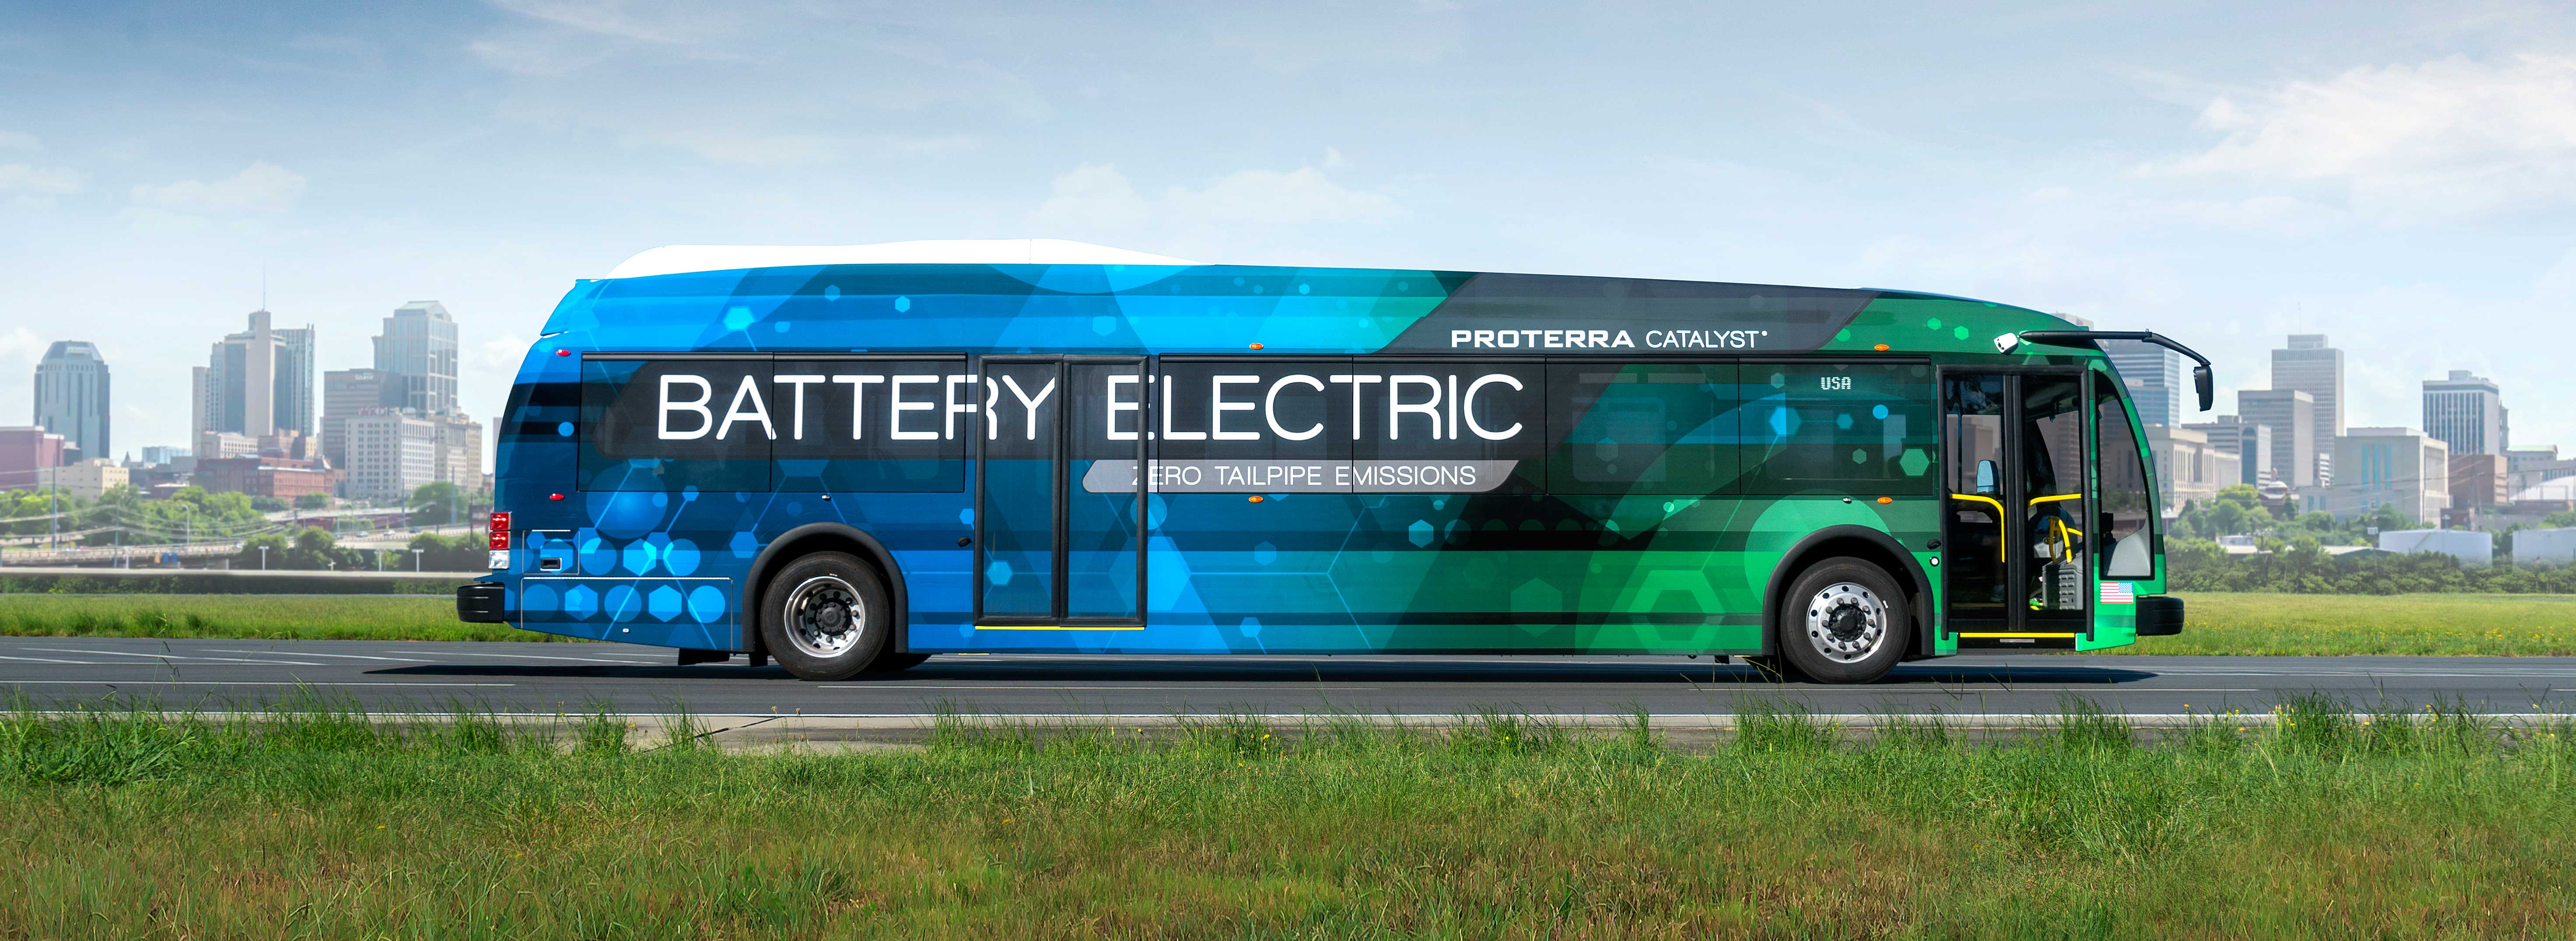 "Image of a Proterra electric bus (source: Proterra)"